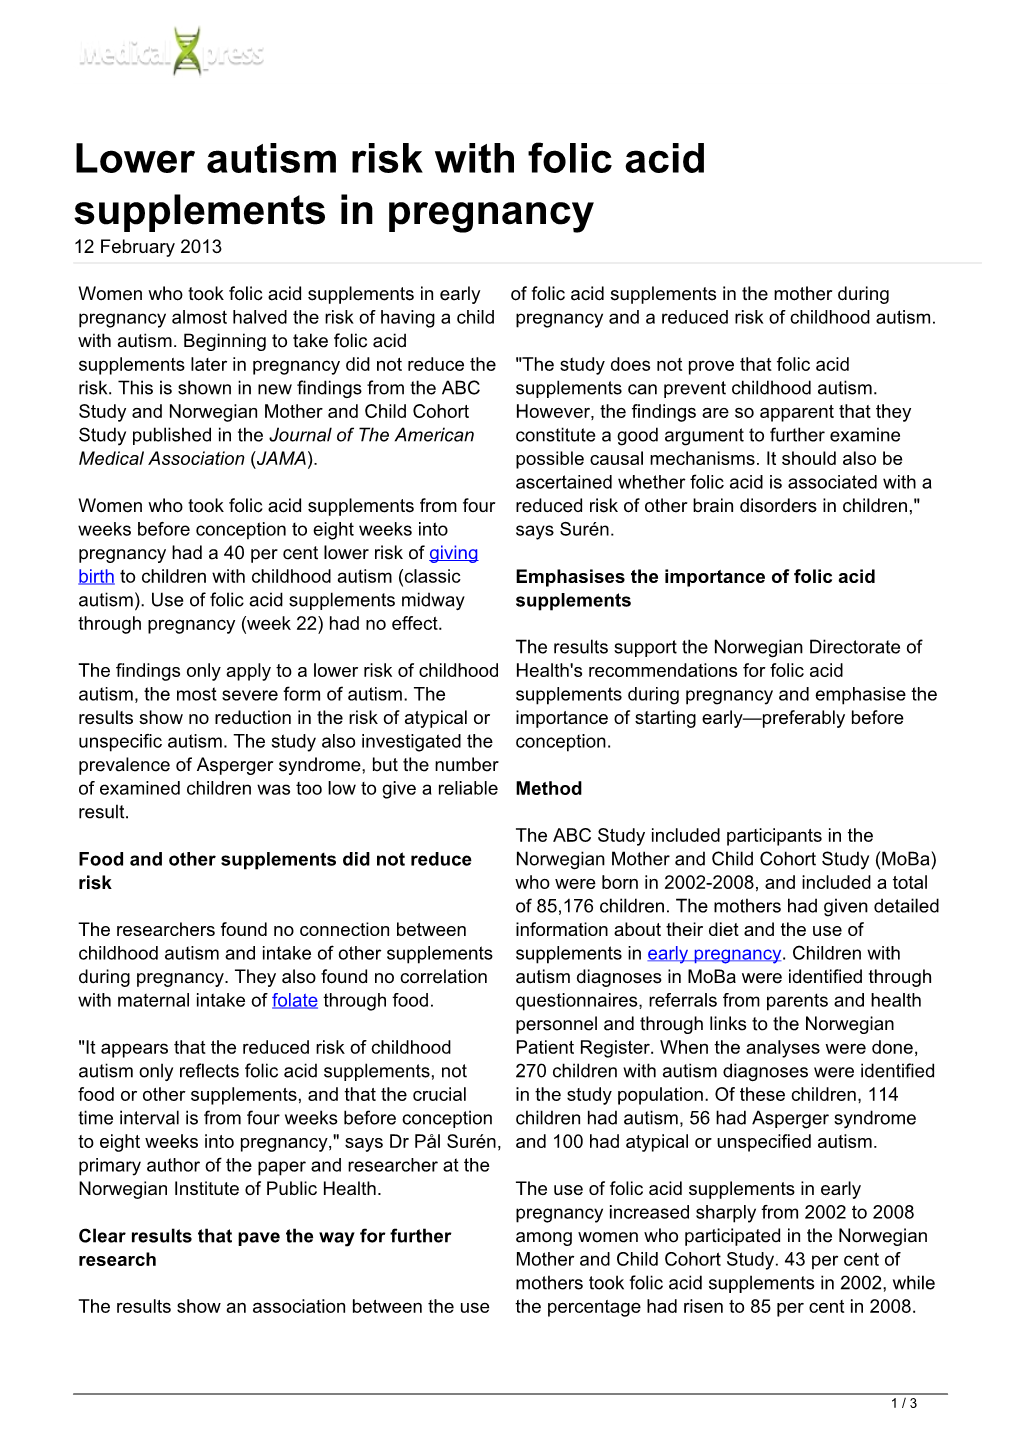 Lower Autism Risk with Folic Acid Supplements in Pregnancy 12 February 2013